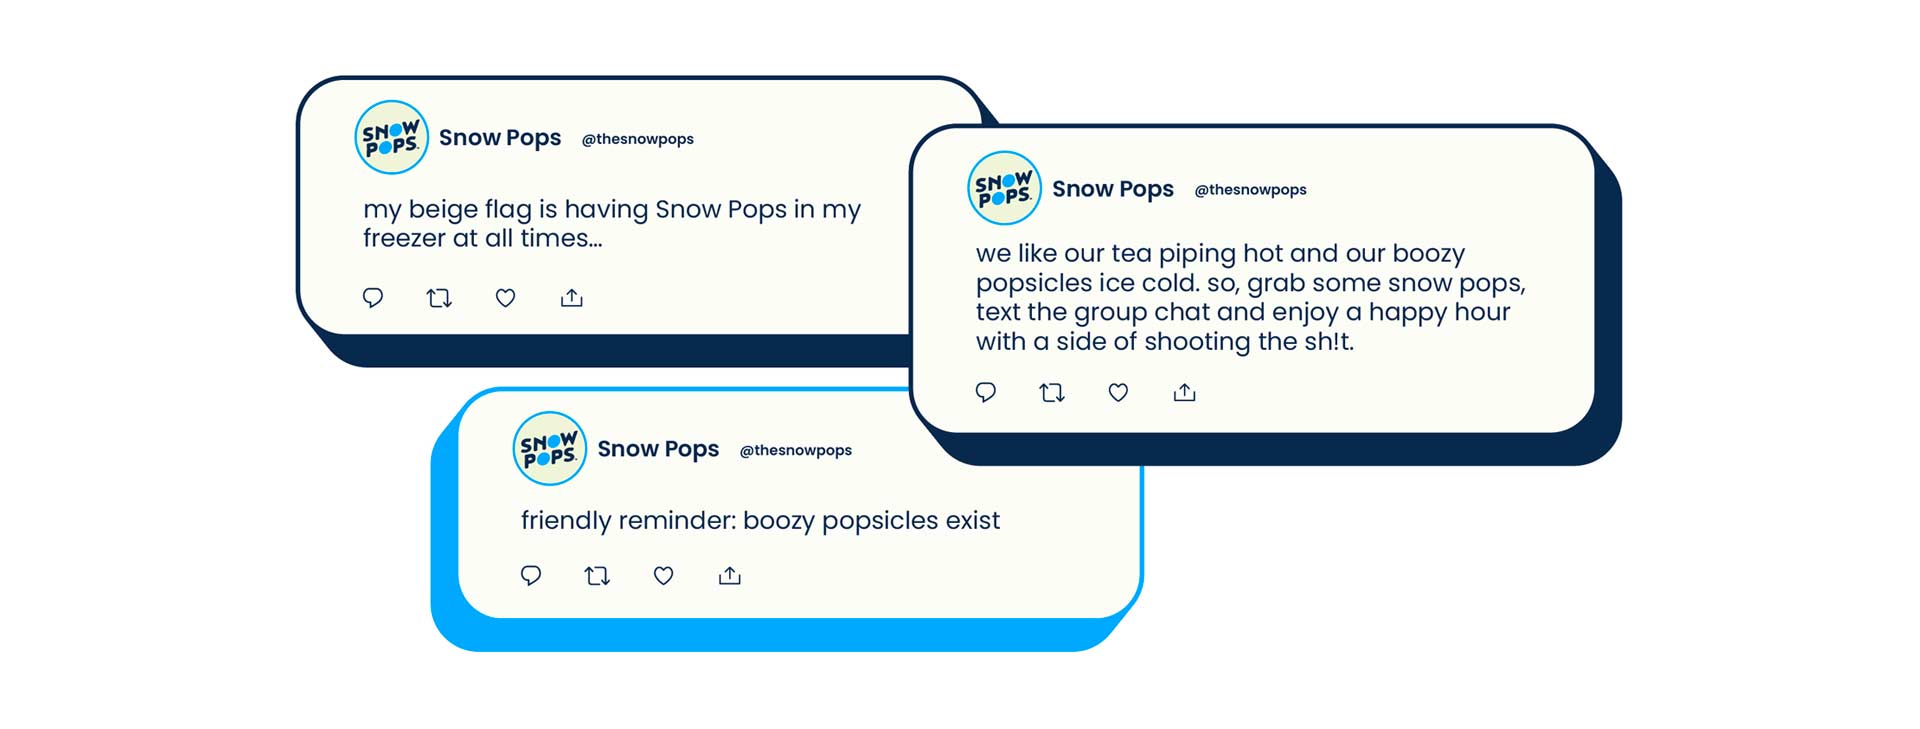 Images of text from three Snow Pops posts. "My beige flag is having Snow Pops in my freezer at all times." "Friendly reminder: boozy popsicles exist" and "We like our tea piping hot and our boozy popsicles ice cold, so grab some snow pops, text the group chat and enjoy a happy hour with a side of shooting the sh!t."